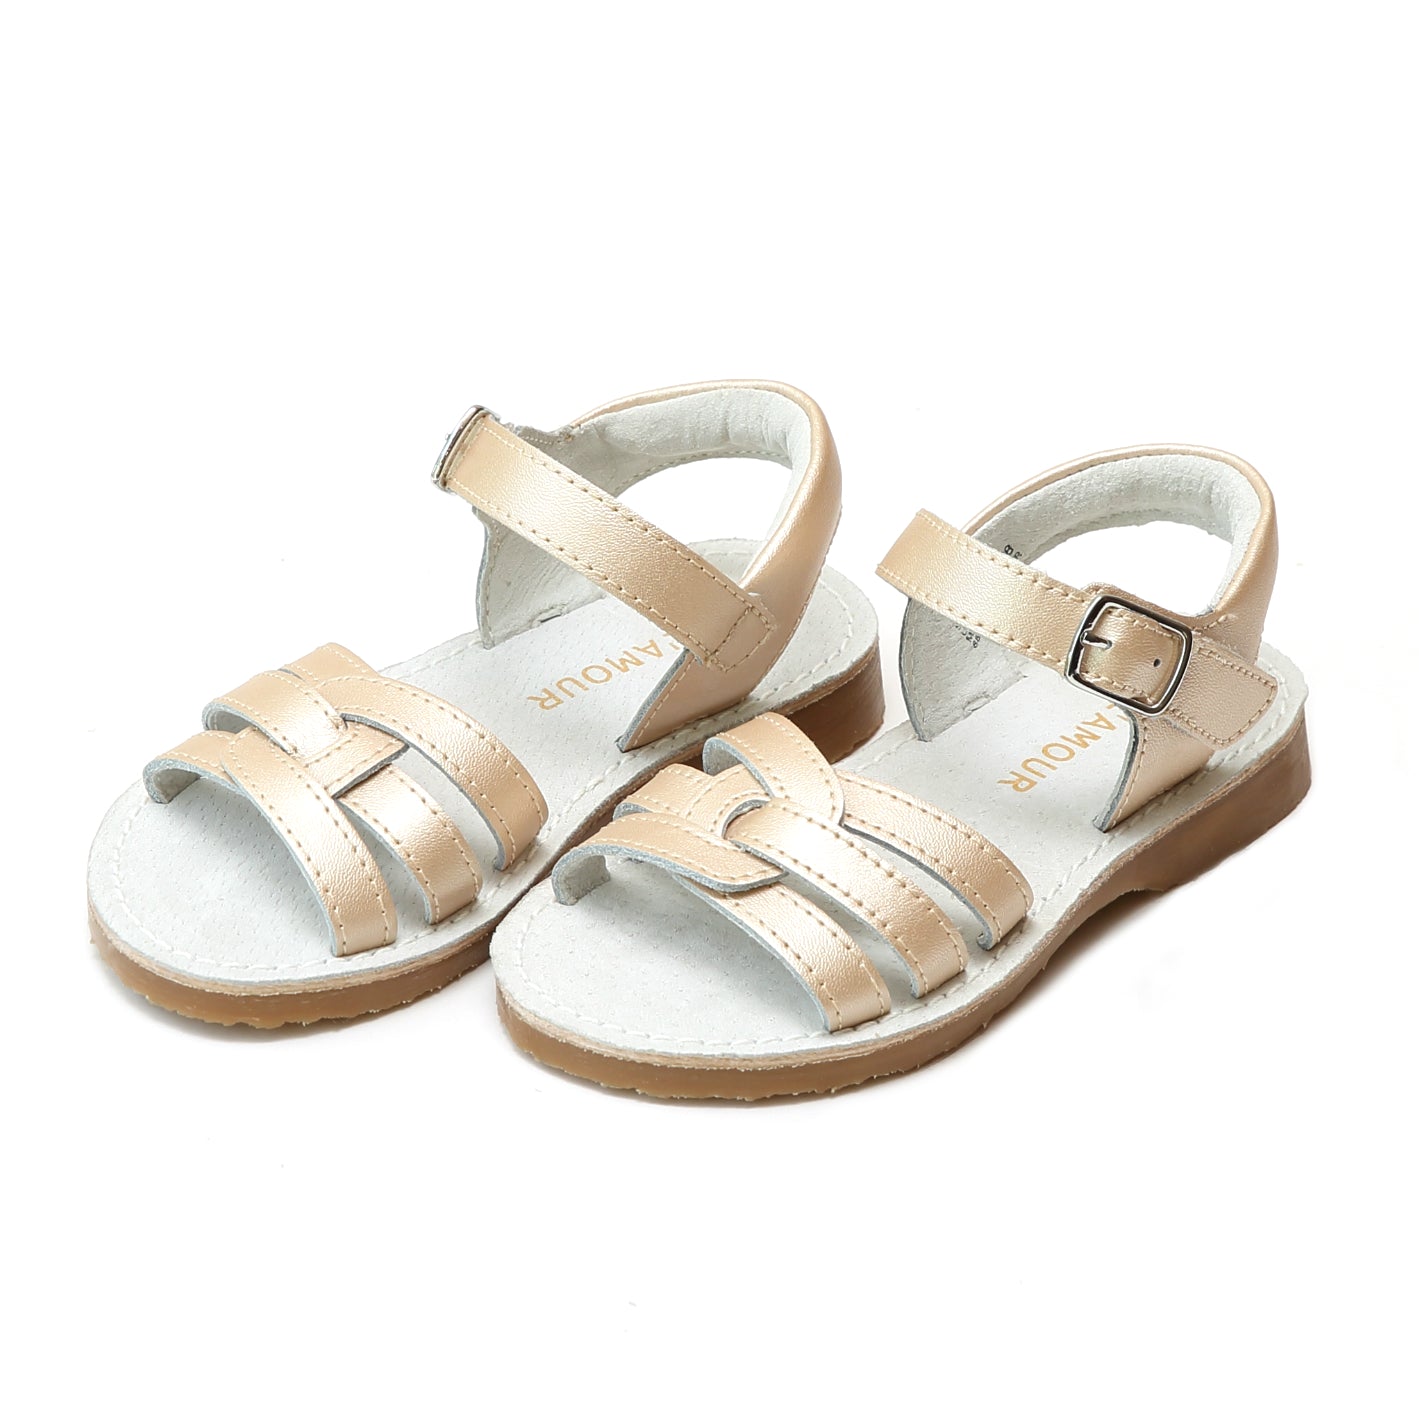 L'Amour Girls Peyton Braided Leather Sandal – L'Amour Shoes